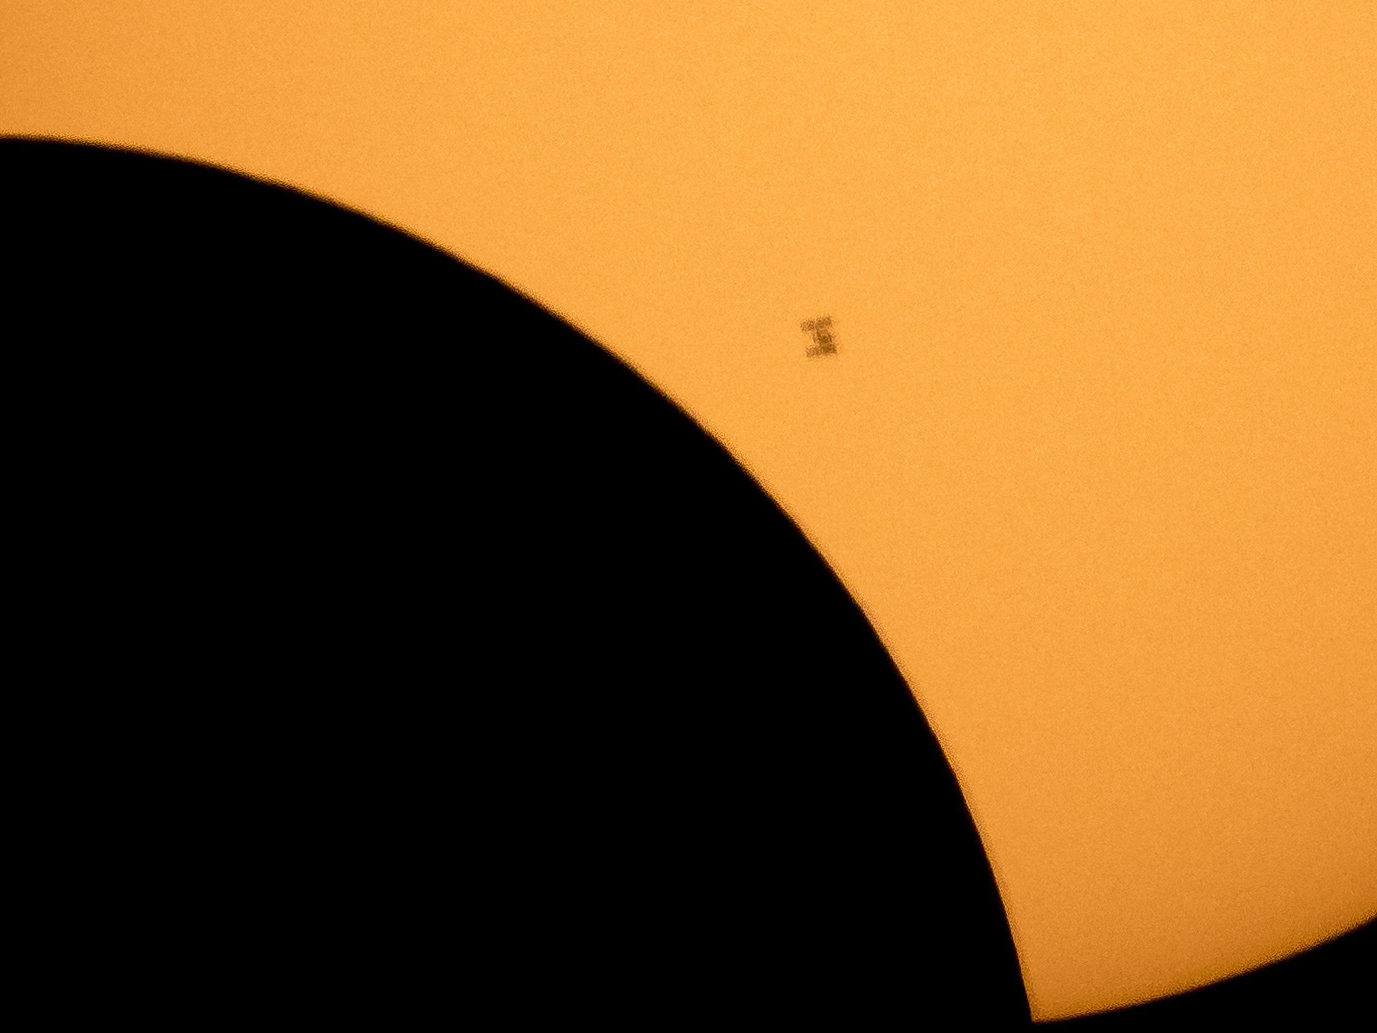 In this image made available by NASA, the International Space Station is silhouetted against the sun during a solar eclipse Monday, Aug. 21, 2017, as seen from Ross Lake, Northern Cascades National Park in Washington state.